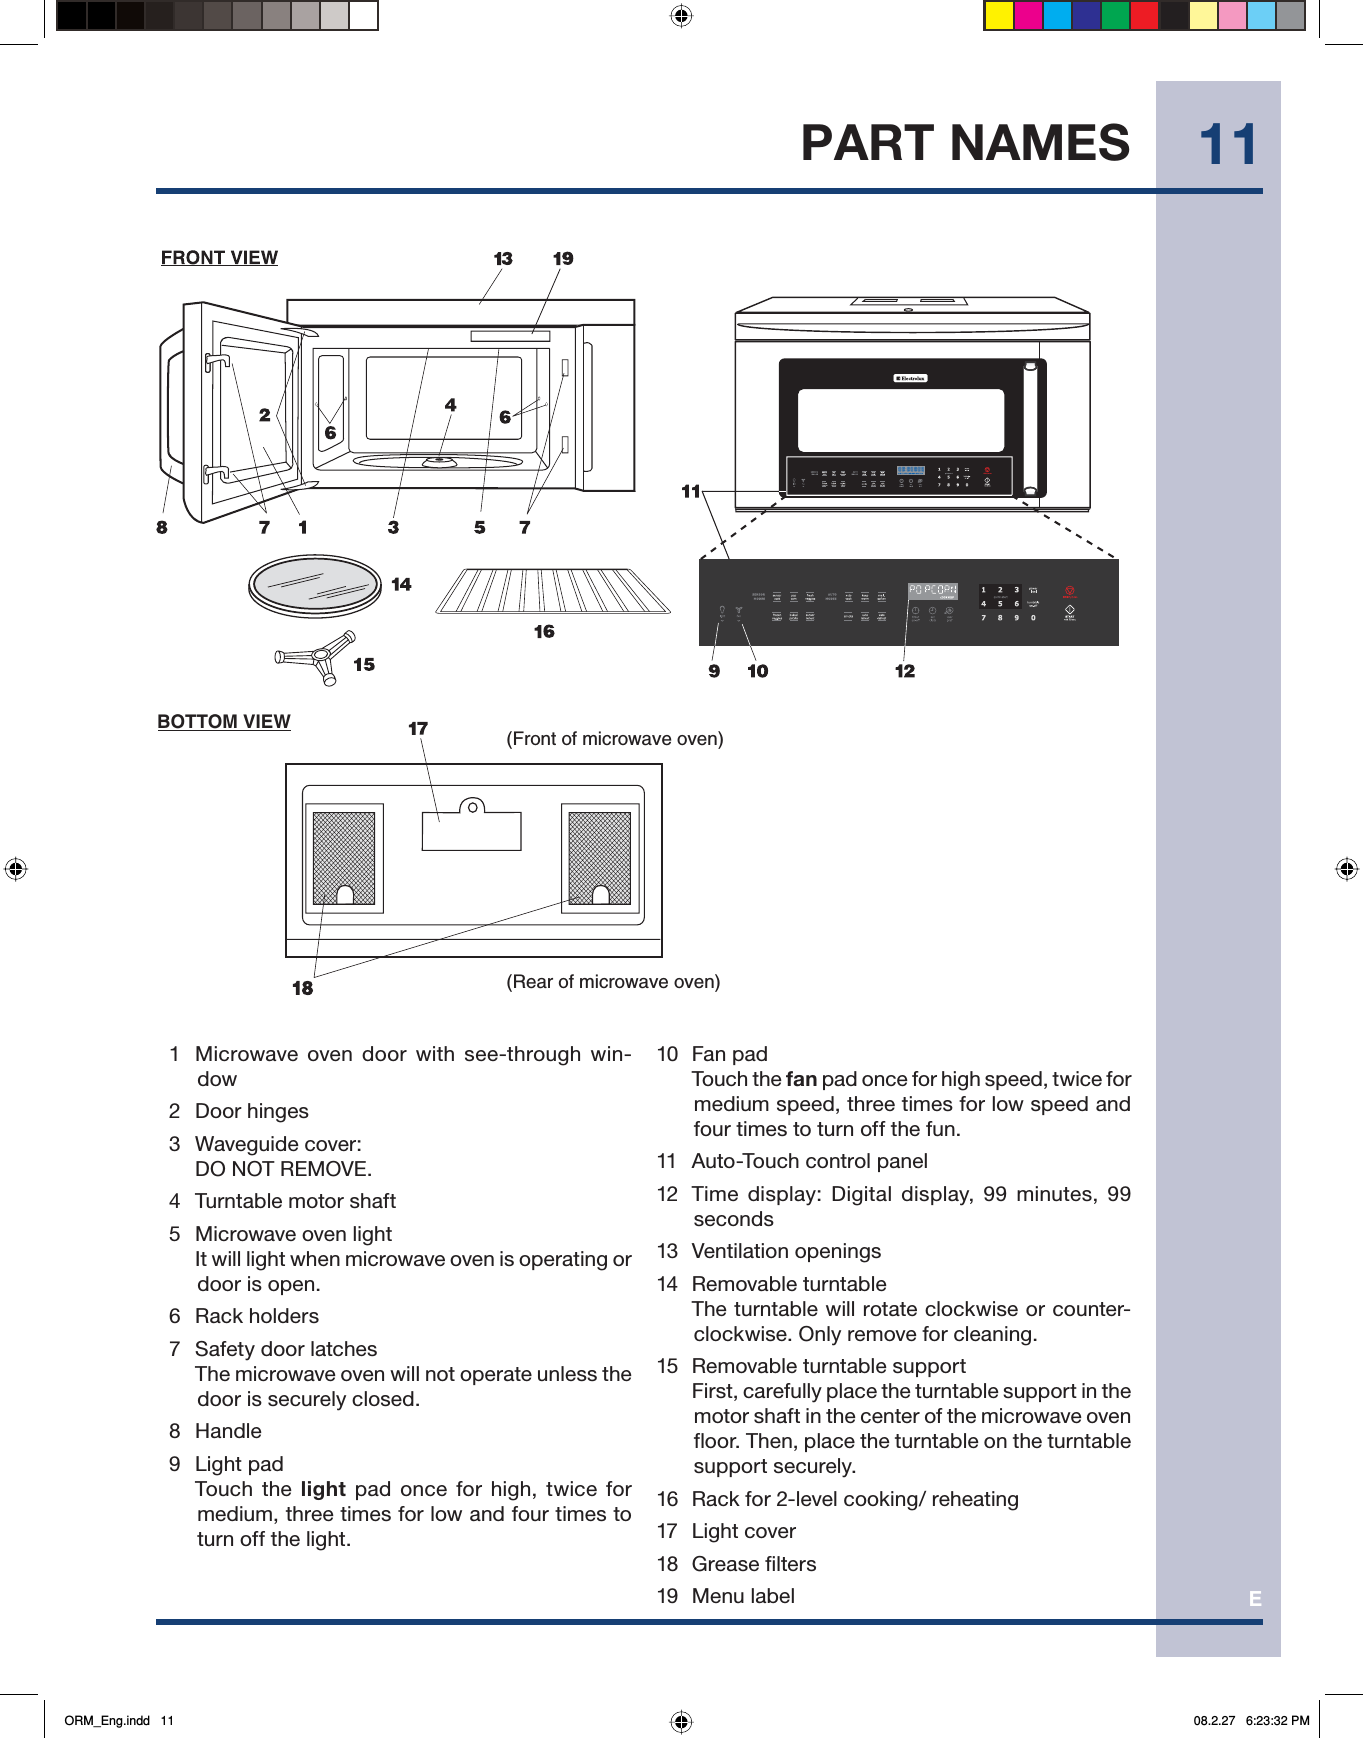 E11 1  Microwave oven door with see-through win-dow 2  Door hinges 3  Waveguide cover:  DO NOT REMOVE.  4  Turntable motor shaft 5  Microwave oven light    It will light when microwave oven is operating or door is open. 6  Rack holders  7  Safety door latches    The microwave oven will not operate unless the door is securely closed. 8  Handle 9  Light pad  Touch the light pad once for high, twice for medium, three times for low and four times to turn off the light.(Front of microwave oven)(Rear of microwave oven)BOTTOM VIEWPART NAMES10 Fan pad  Touch the fan pad once for high speed, twice for medium speed, three times for low speed and four times to turn off the fun.11  Auto-Touch control panel12  Time display: Digital display, 99 minutes, 99 seconds13 Ventilation openings14 Removable turntable    The turntable will rotate clockwise or counter-clockwise. Only remove for cleaning.15  Removable turntable support    First, carefully place the turntable support in the motor shaft in the center of the microwave oven floor. Then, place the turntable on the turntable support securely.16  Rack for 2-level cooking/ reheating17 Light cover18 Grease filters19 Menu labelORM_Eng.indd   11ORM_Eng.indd   11 08.2.27   6:23:32 PM08.2.27   6:23:32 PM